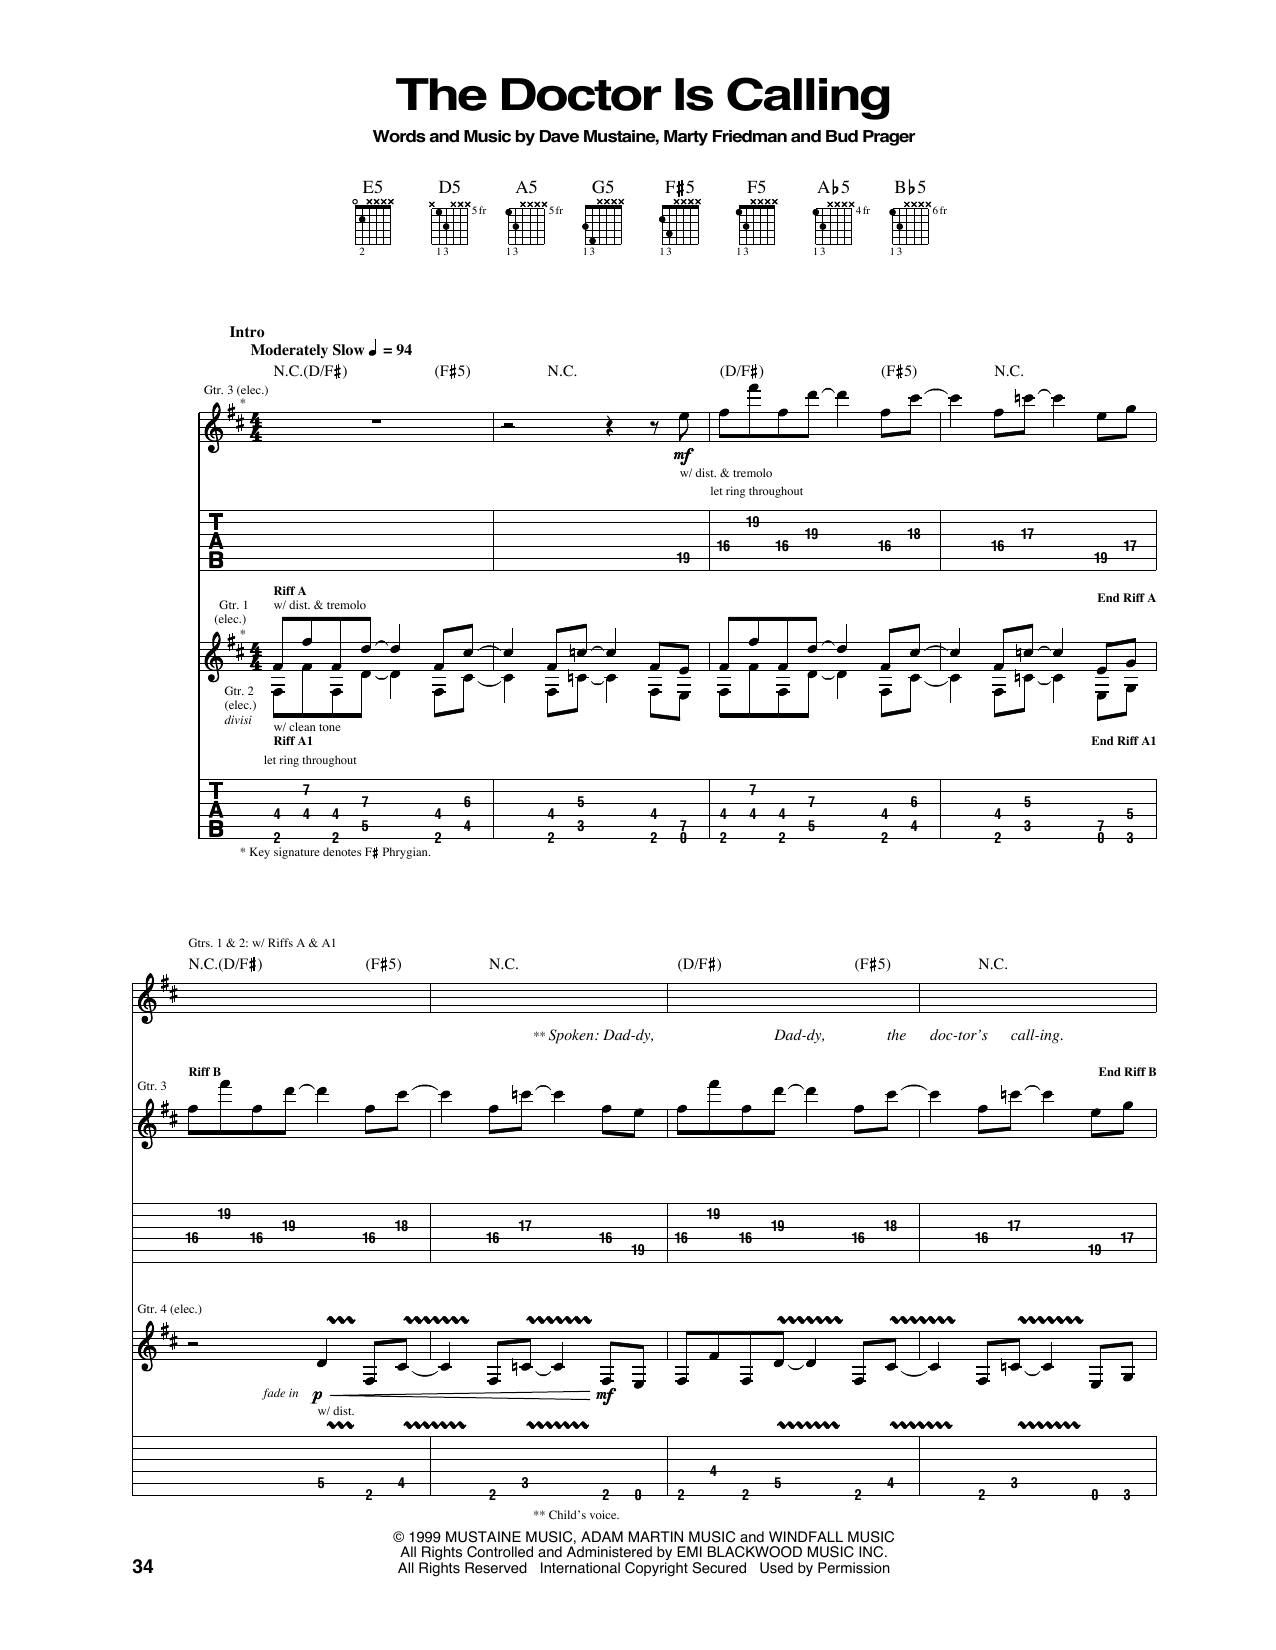 Download Megadeth The Doctor Is Calling Sheet Music